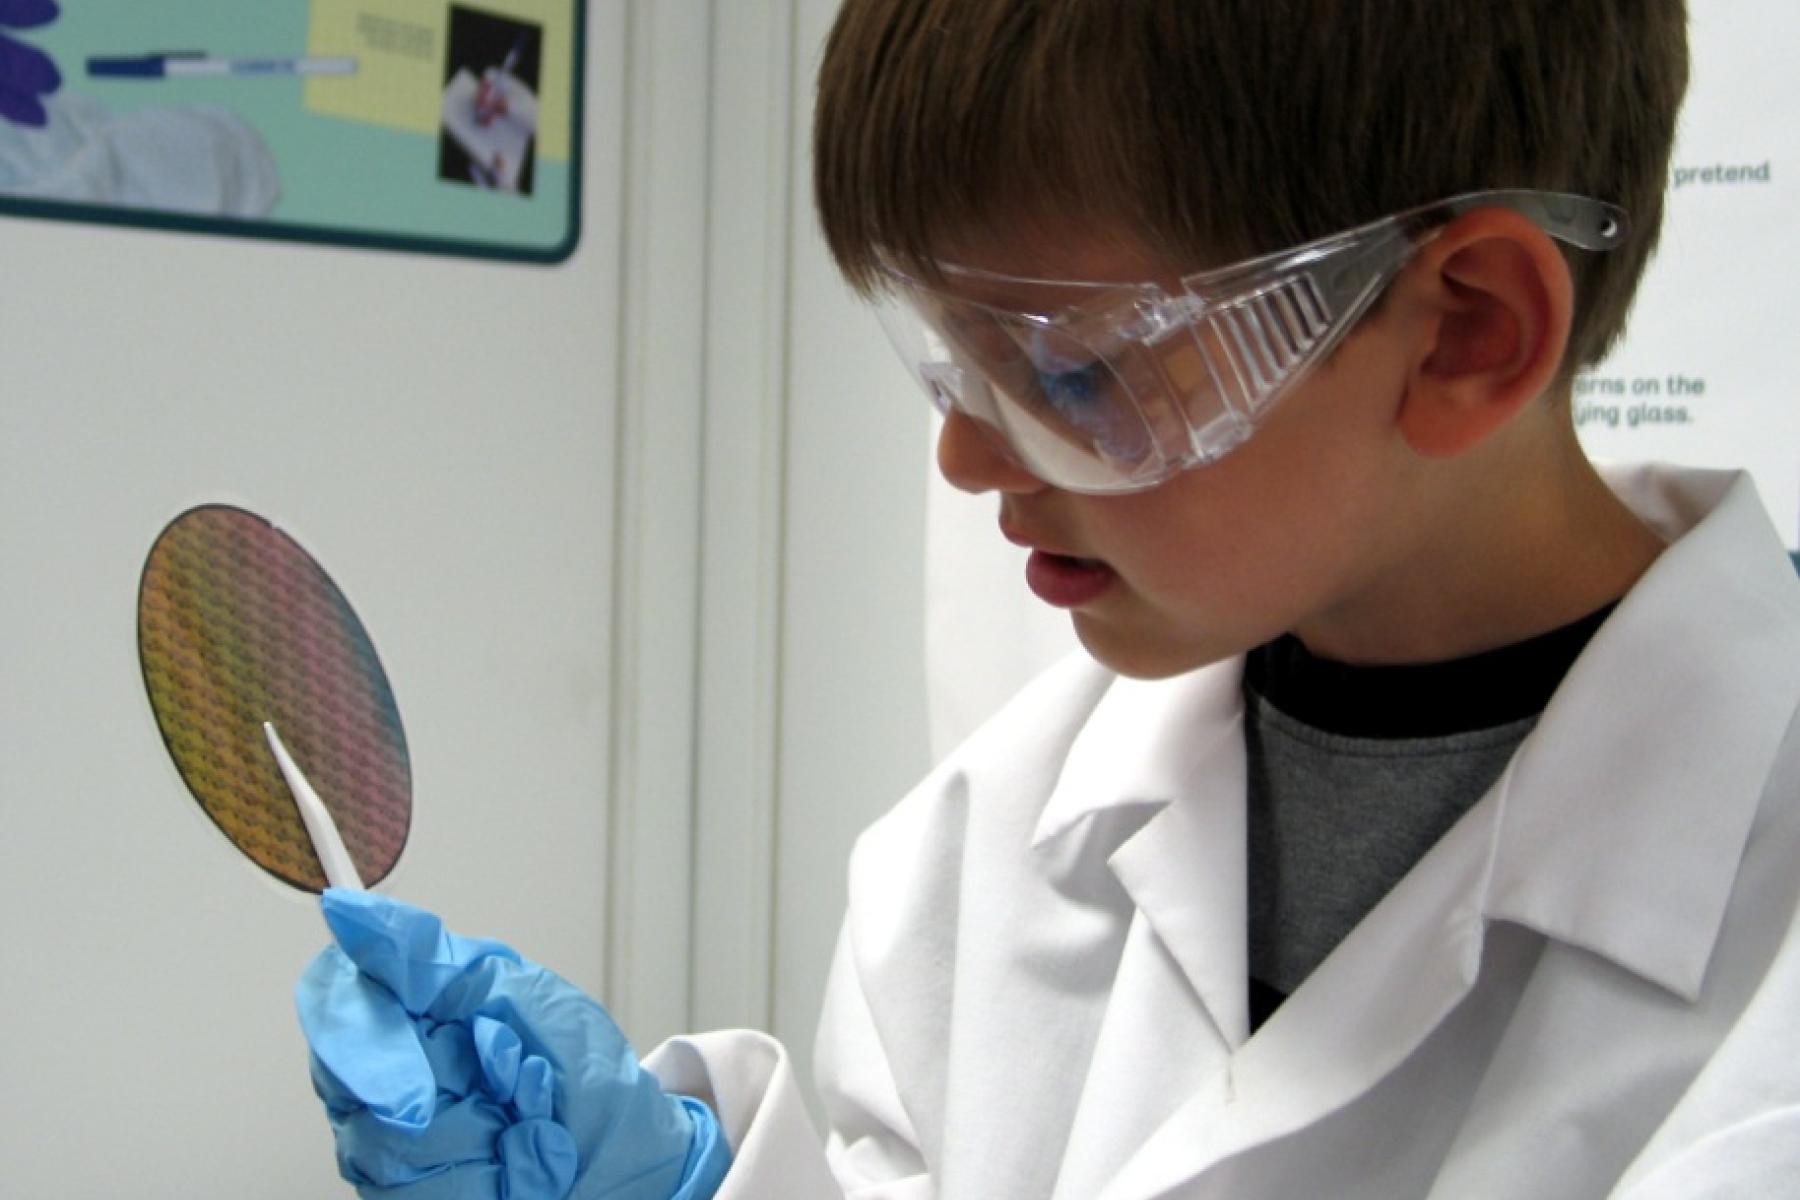 Little boy looking at a silicon wafer in the NanoLab exhibit